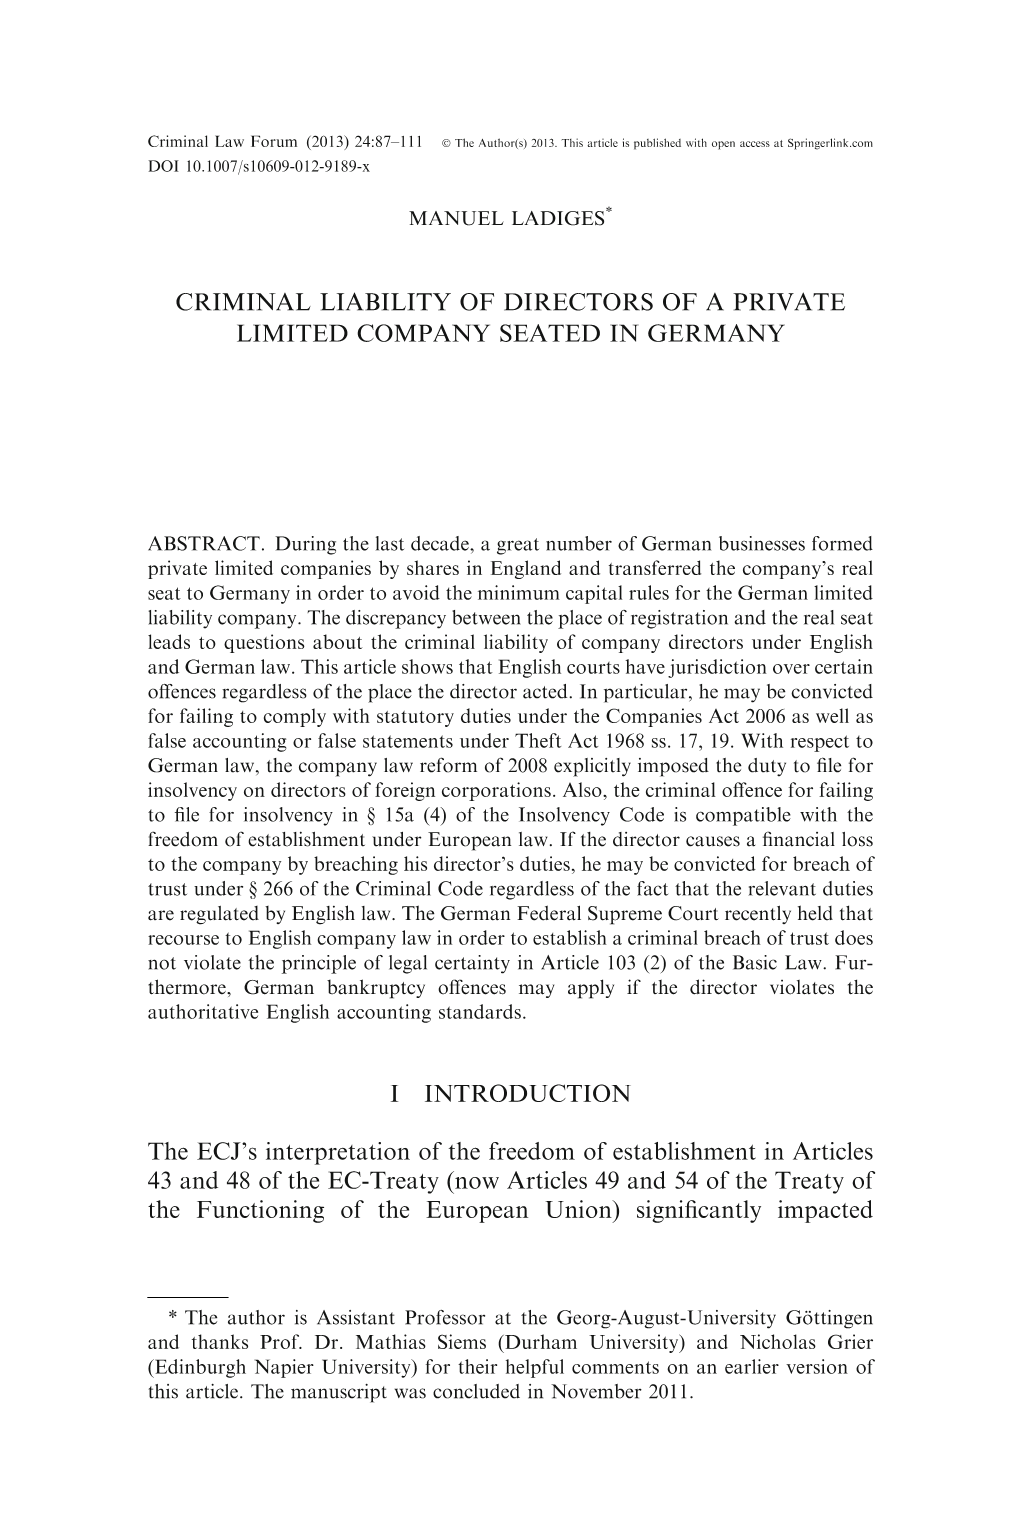 Criminal Liability of Directors of a Private Limited Company Seated in Germany